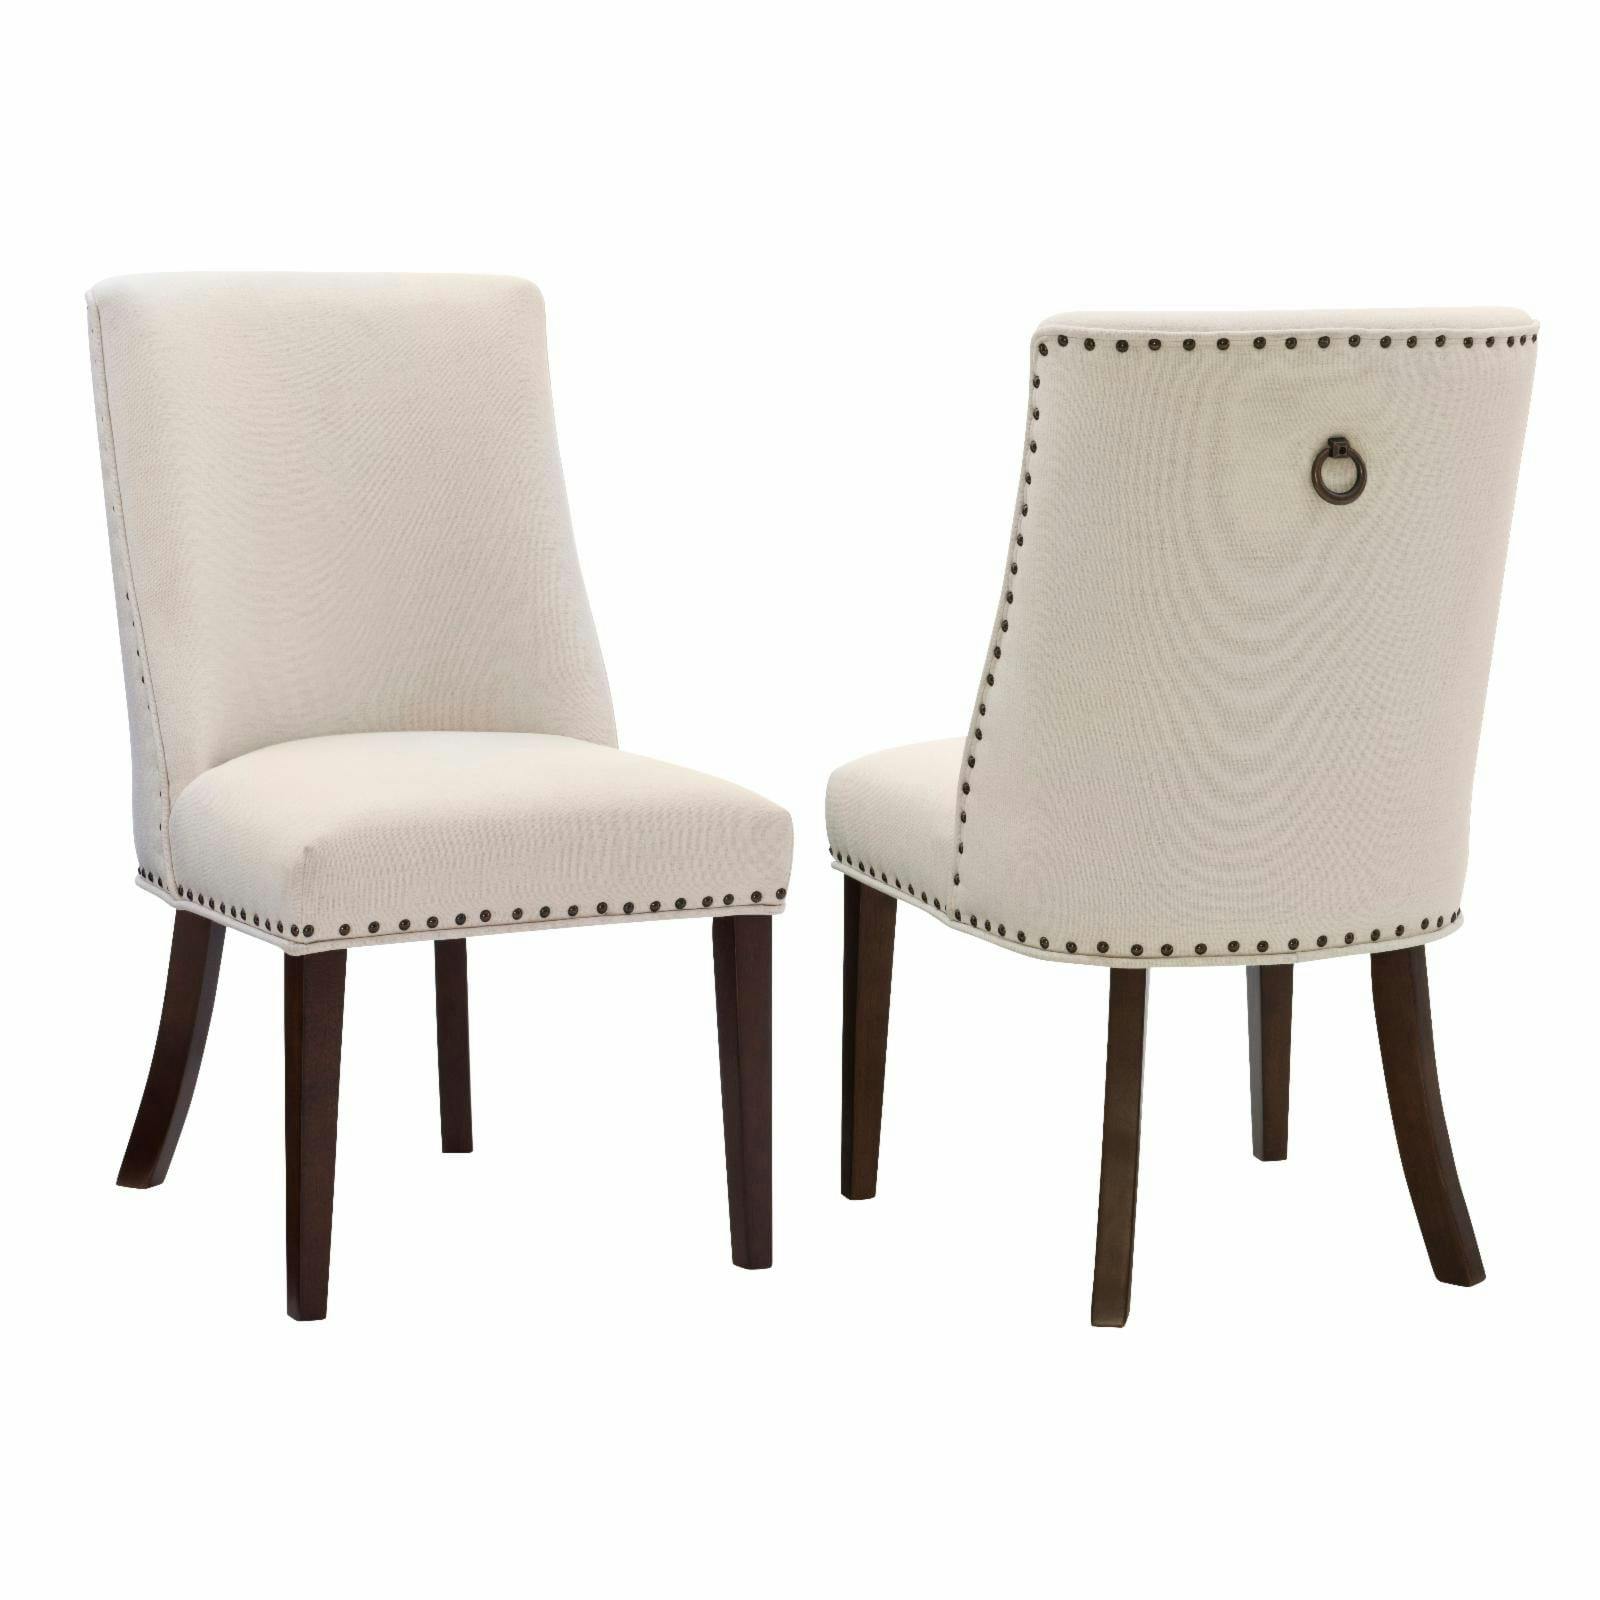 Espresso Natural Wood Upholstered Dining Chair with Linen Seat